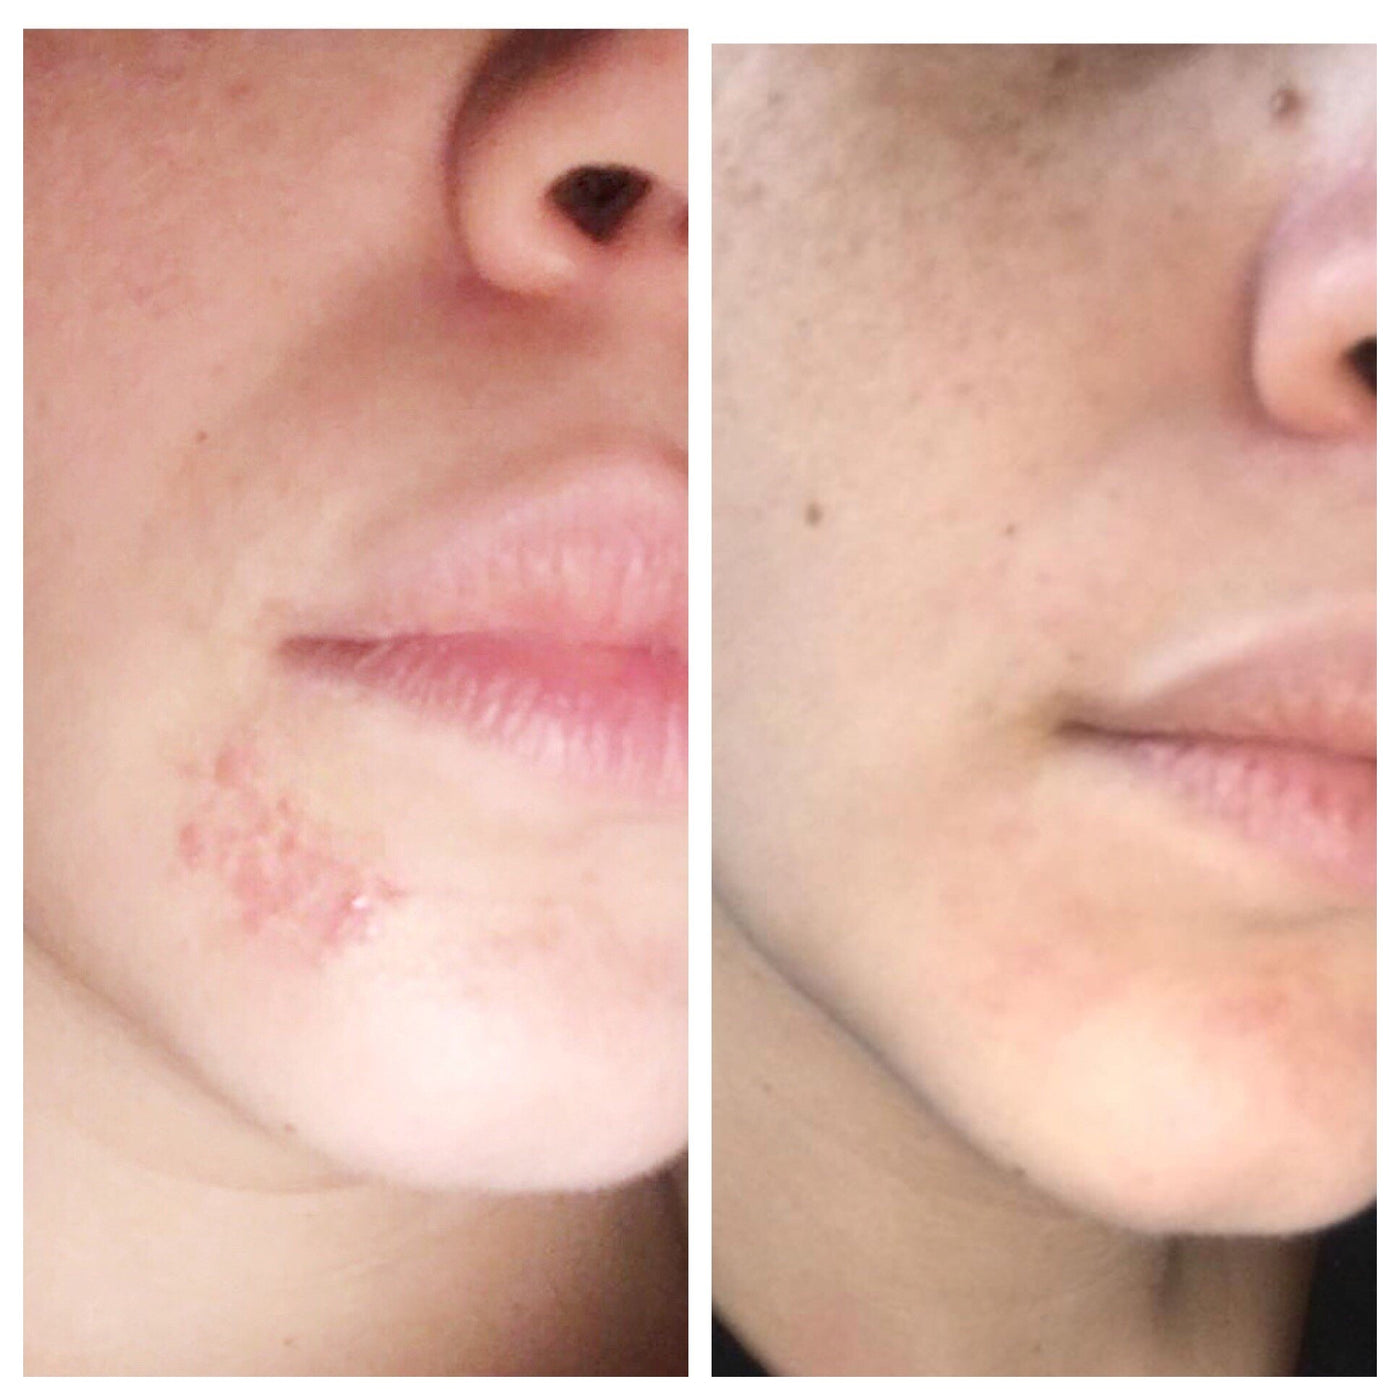 Before and after photo of face from tamamu oil benefits